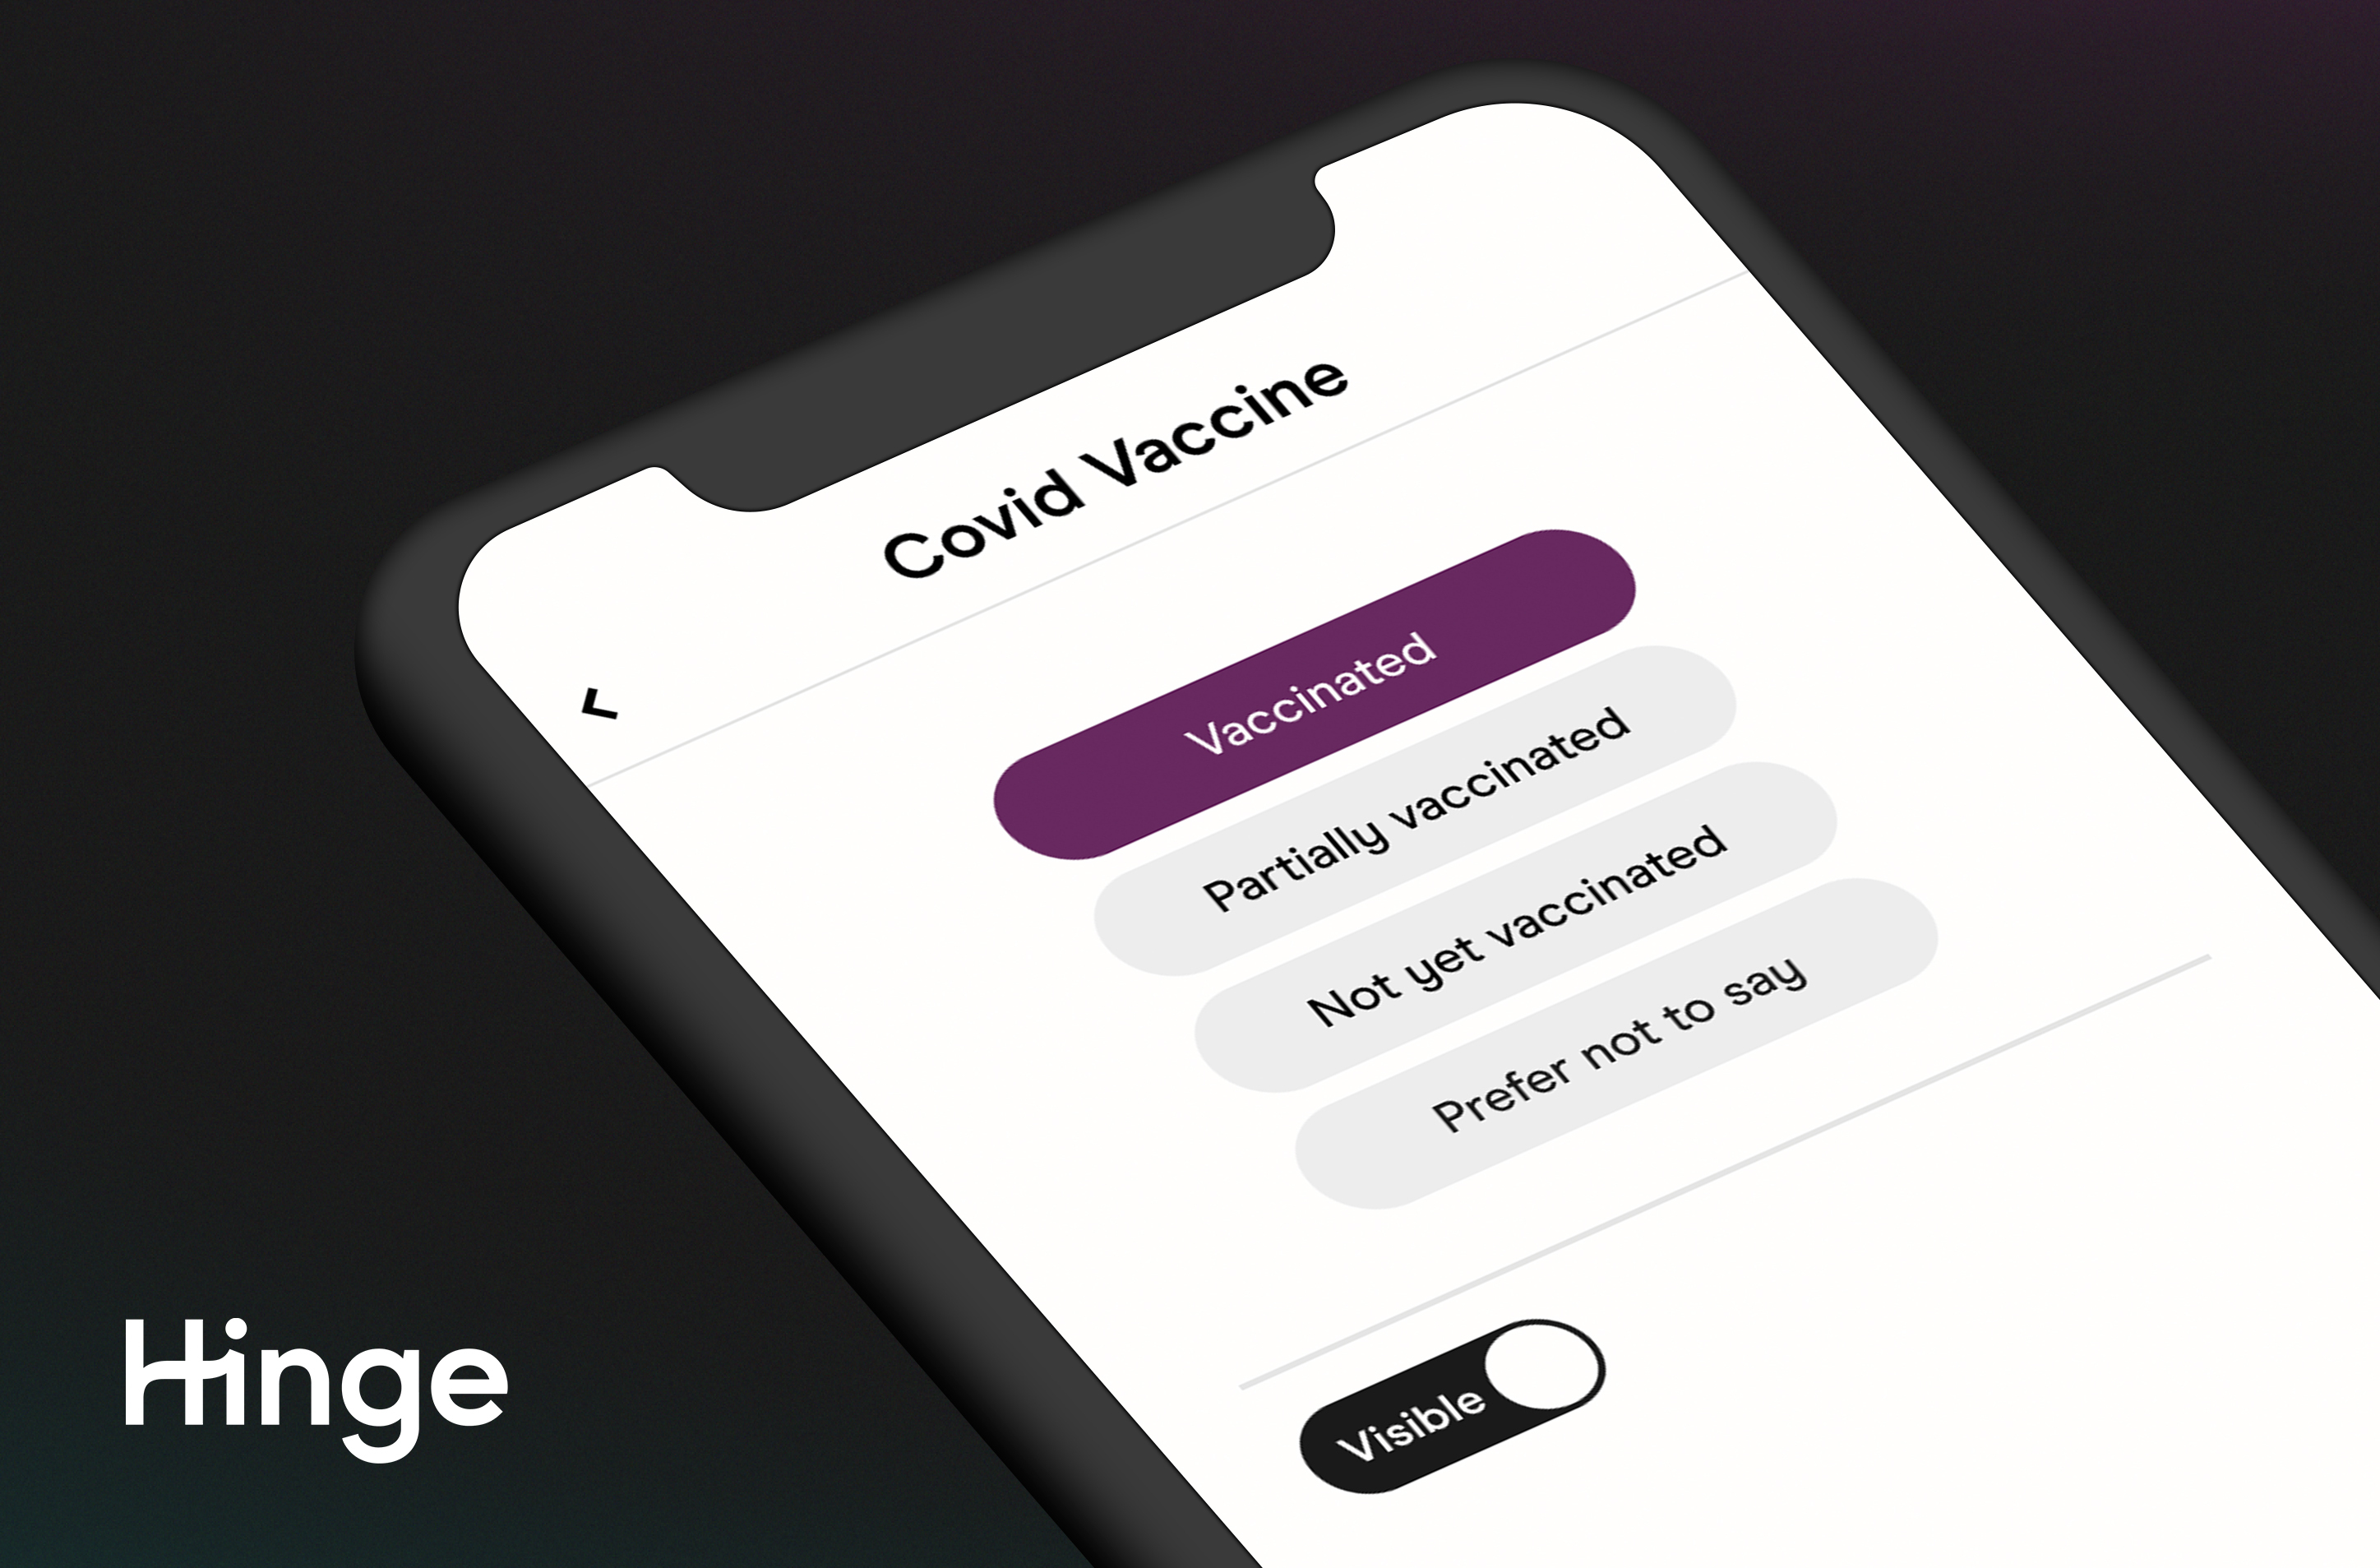 Hinge will give users who participate in their vaccination campaign a free “Rose,” which indicates to other users that they're excited to get to know them.